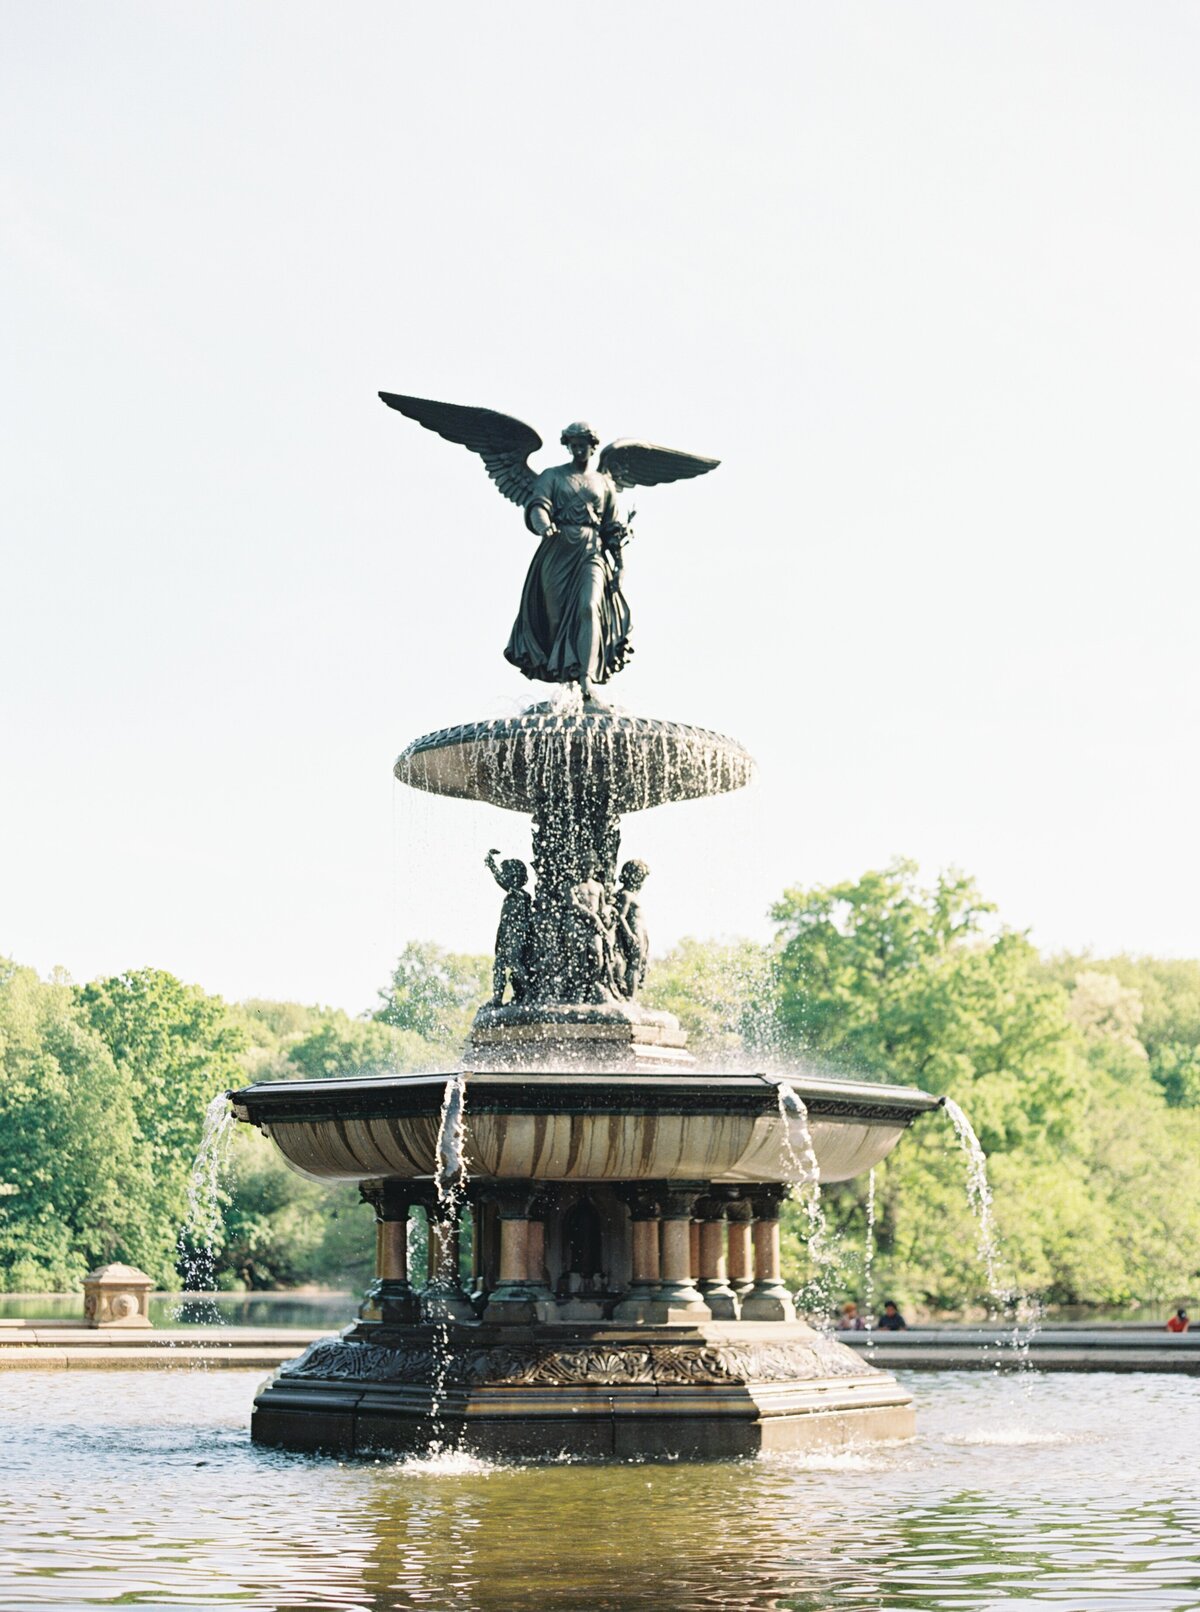 Bethesda fountain engagement session